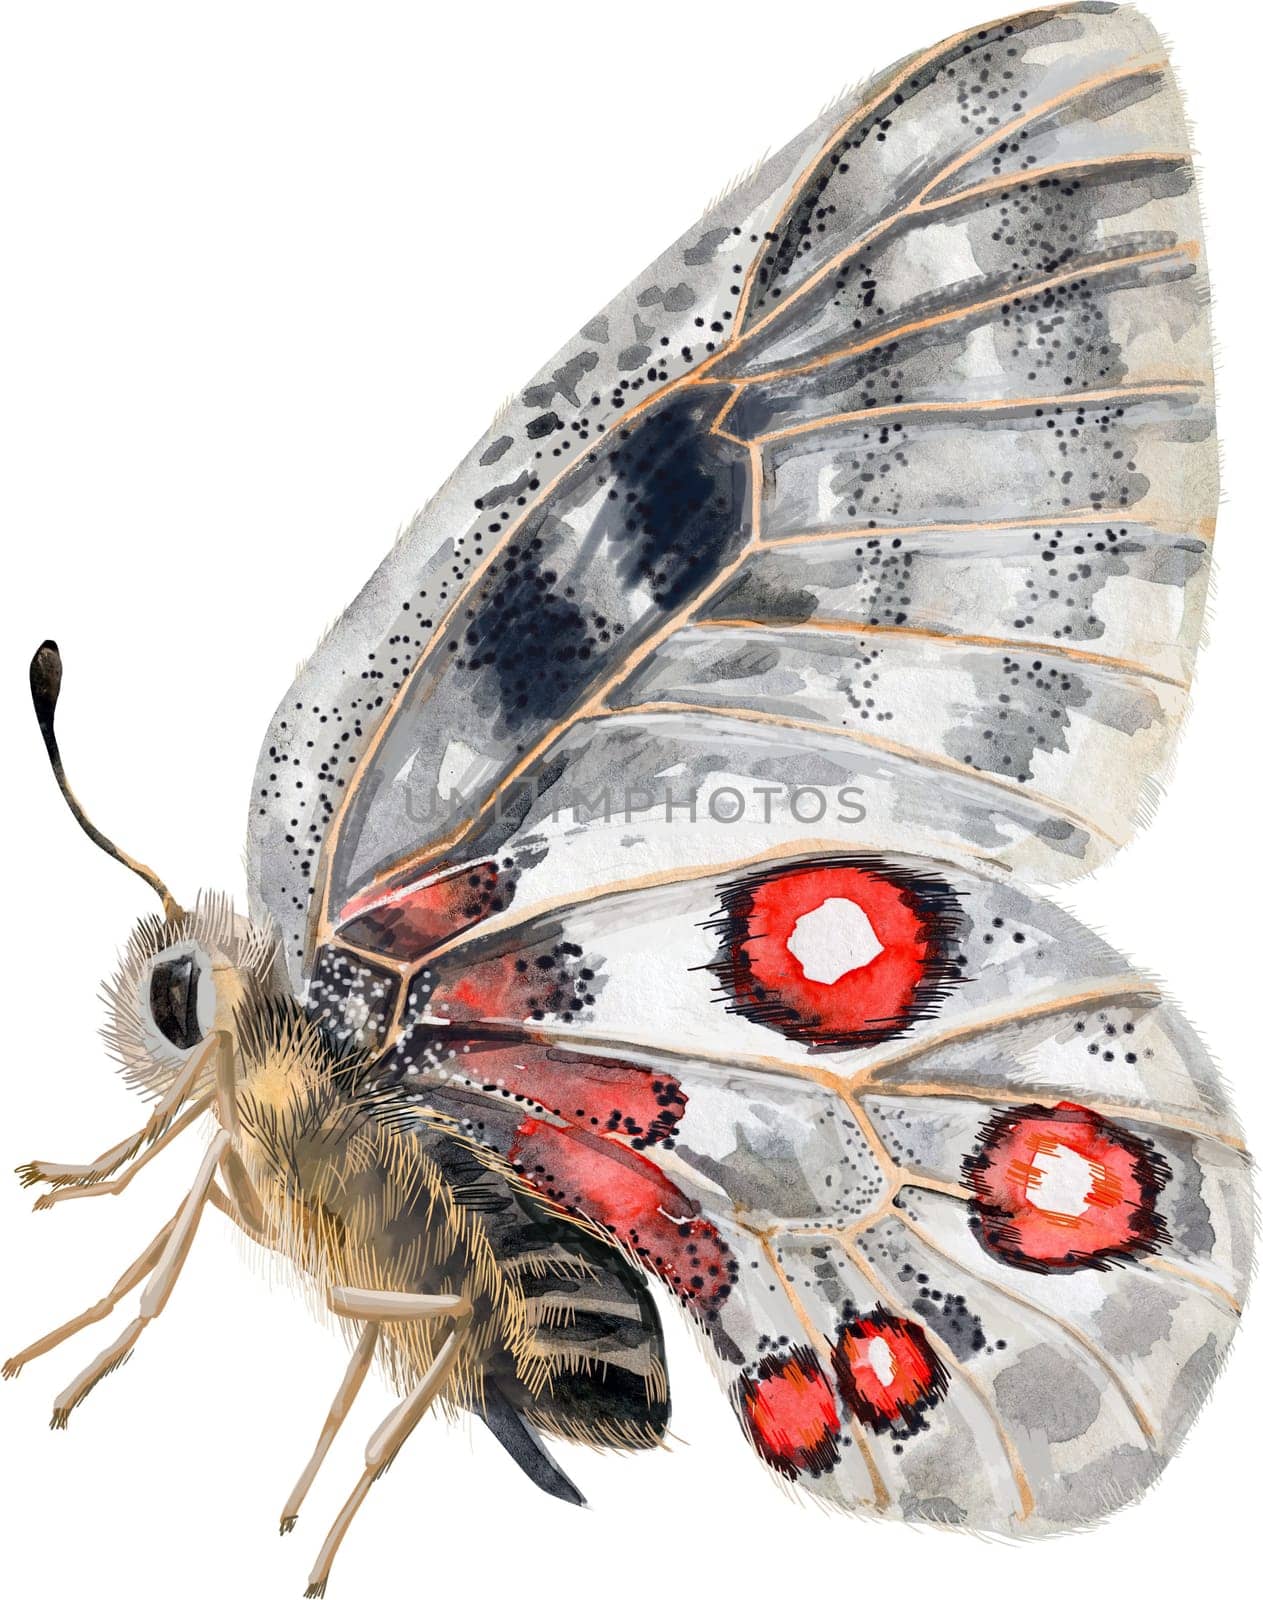 Apollo butterfly living in mountainous areas, isolated on white background. Watercolor illustration